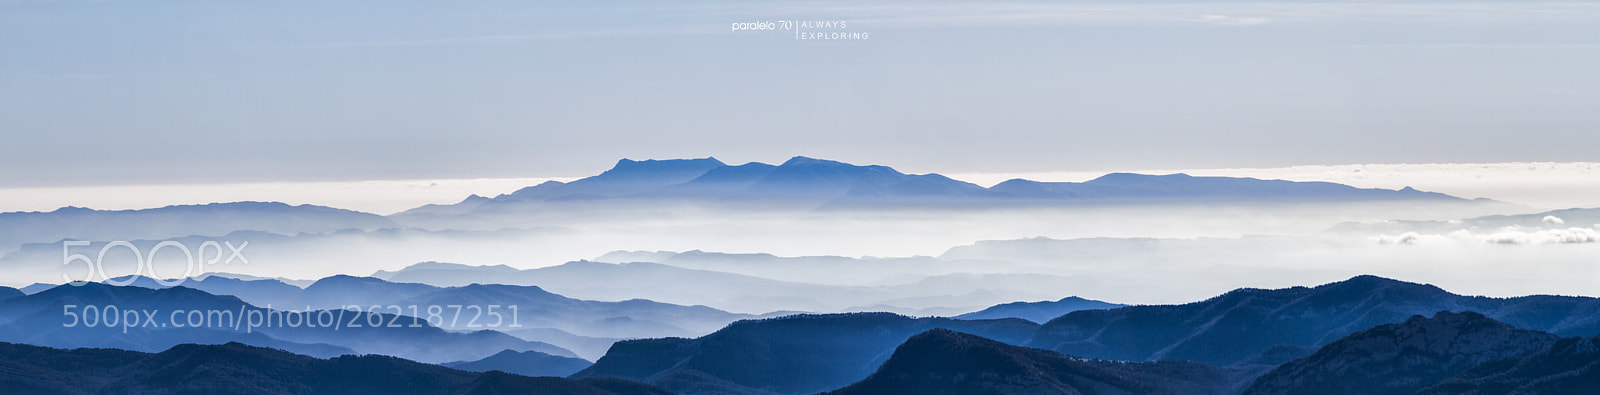 Canon EOS 7D sample photo. Montseny from coll de photography